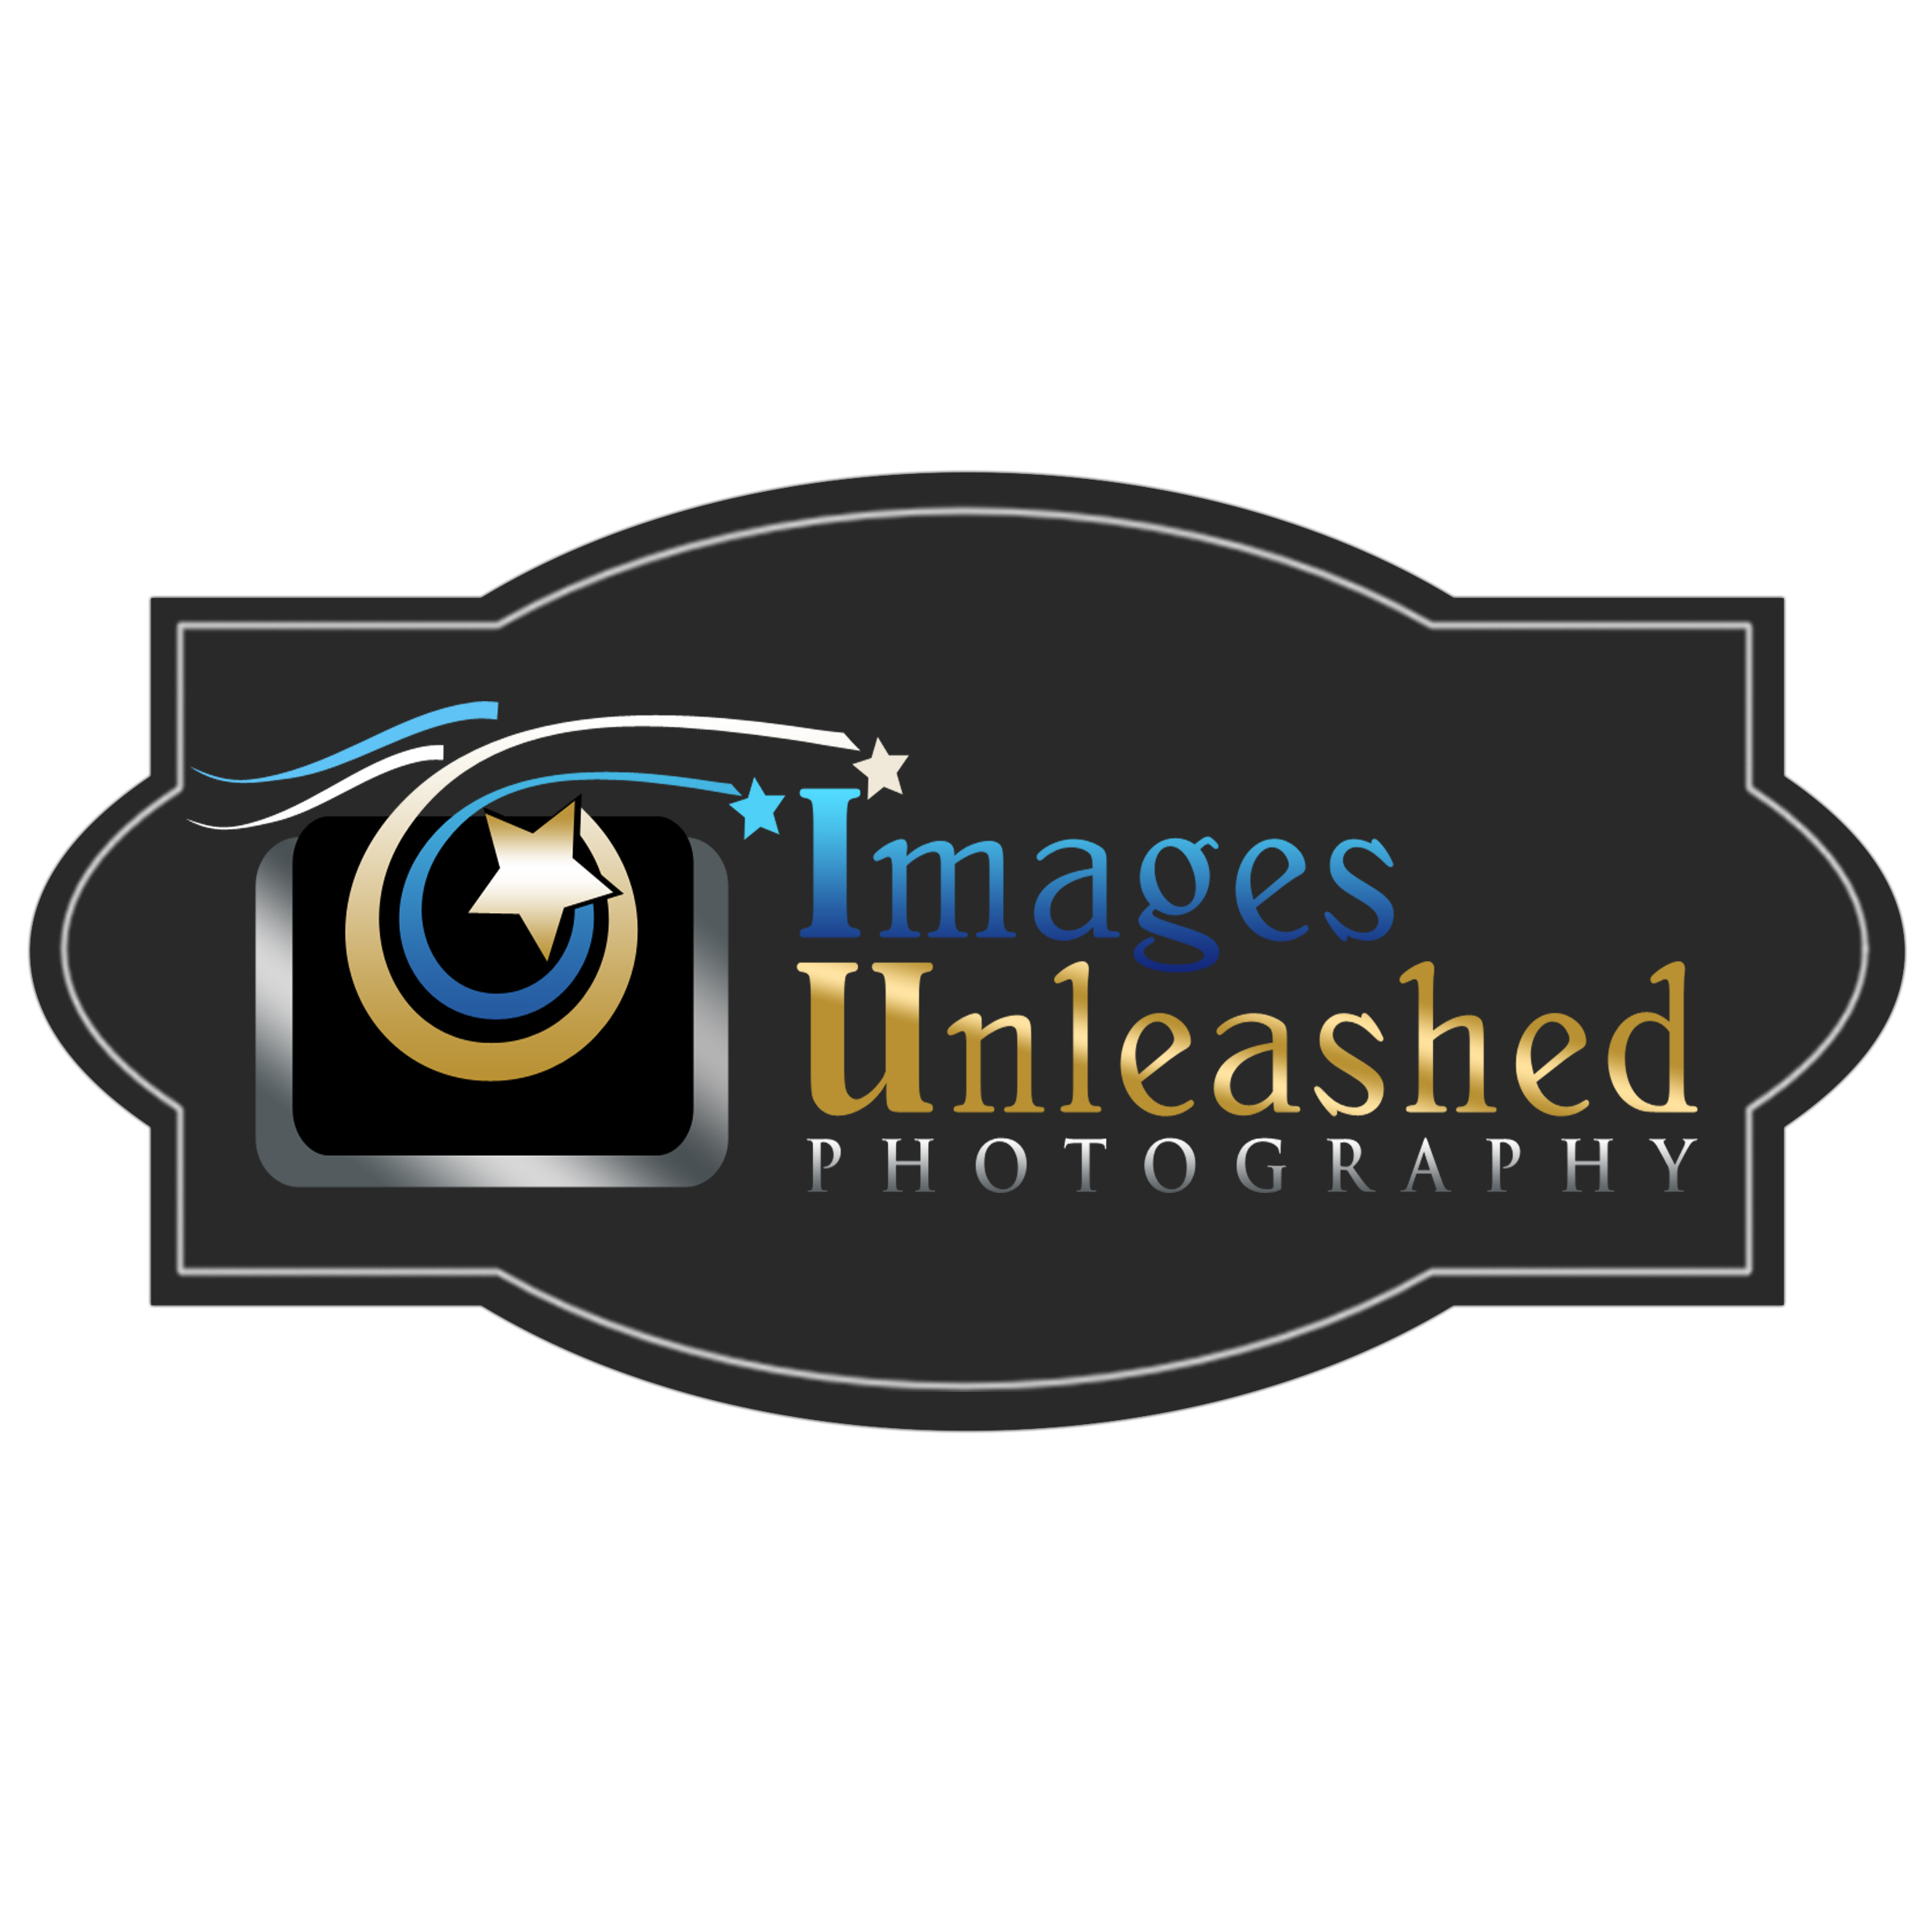 Images Unleashed Photography